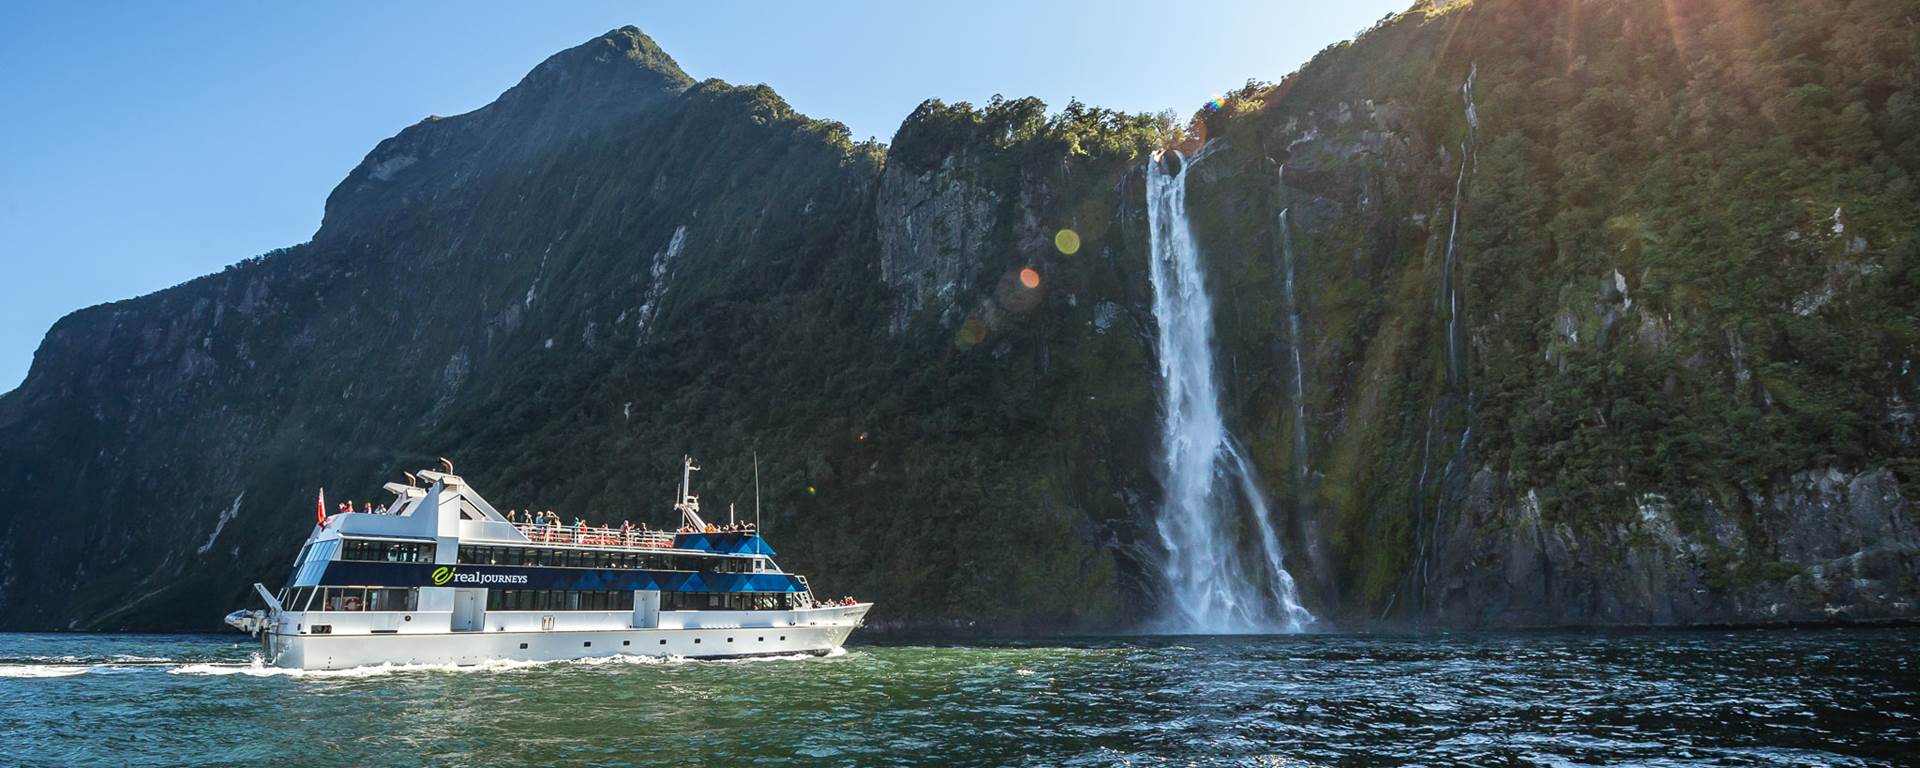 Milford Sound scenic cruise vessel by Stirling Falls